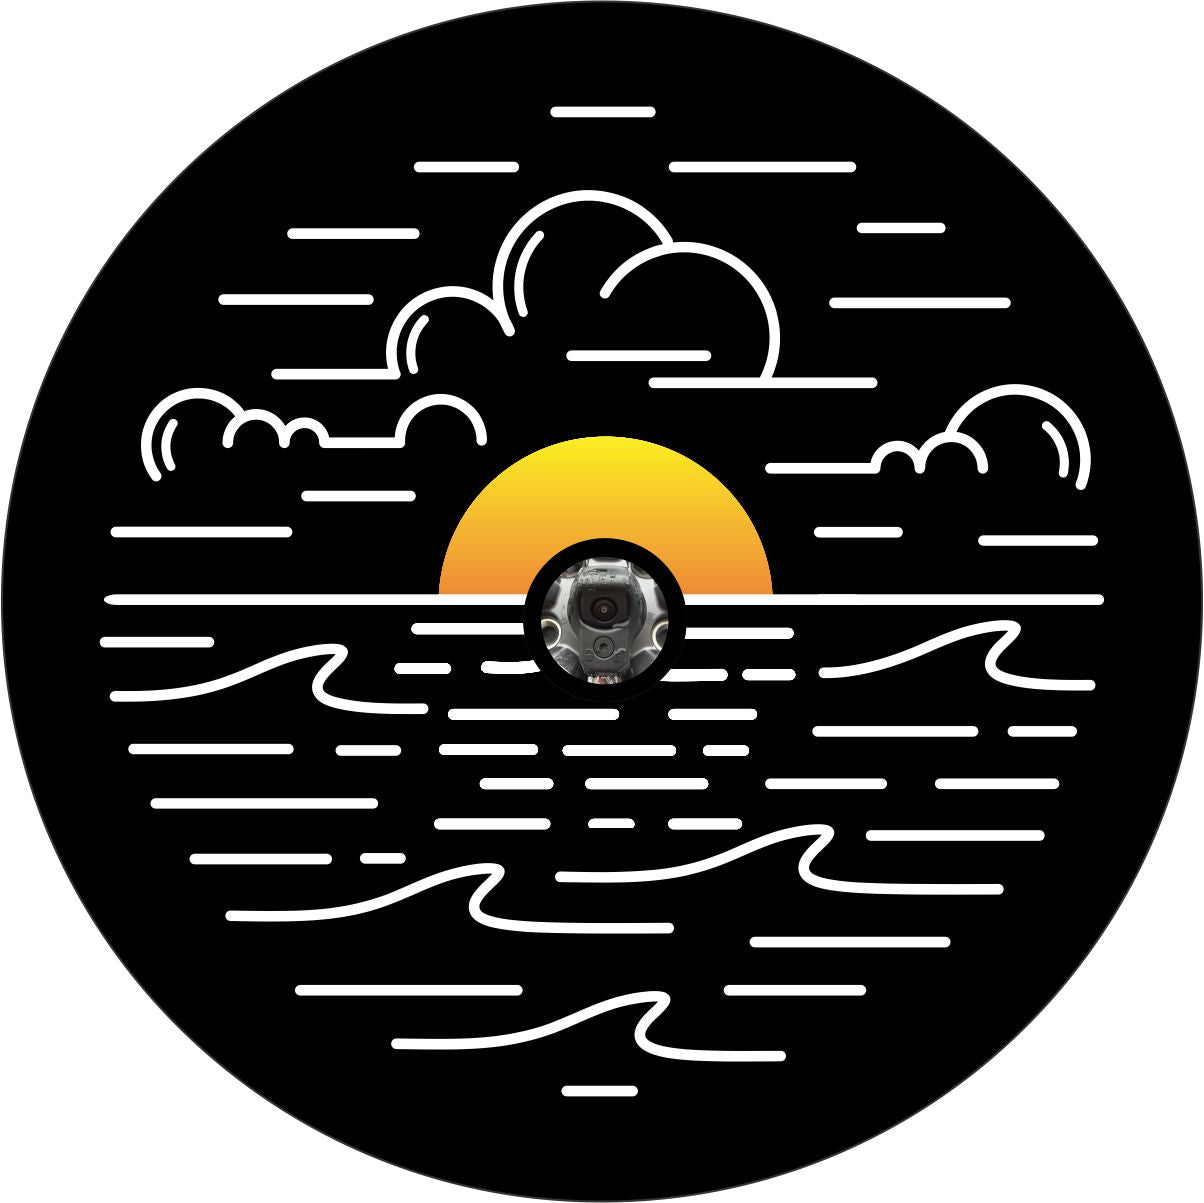 White line art landscape on black vinyl design of the water ocean and sky with a bright orange and yellow sun falling on the horizon spare tire cover with a center hole to fit a backup camera that is installed on the spare tire.